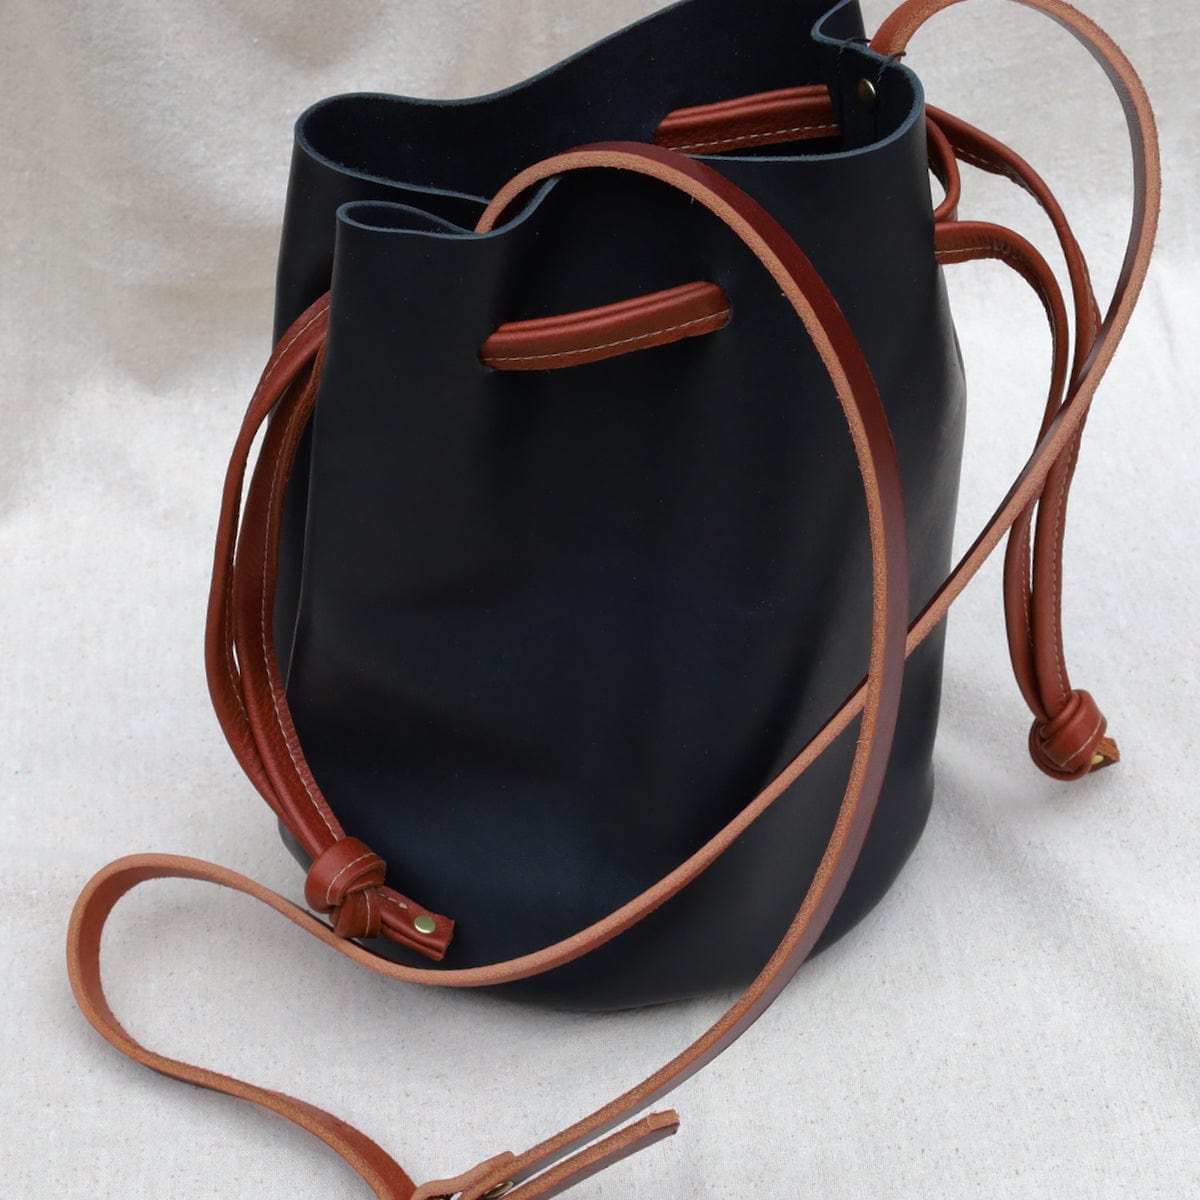 BAG The Ana Bucket in Black with Cognac